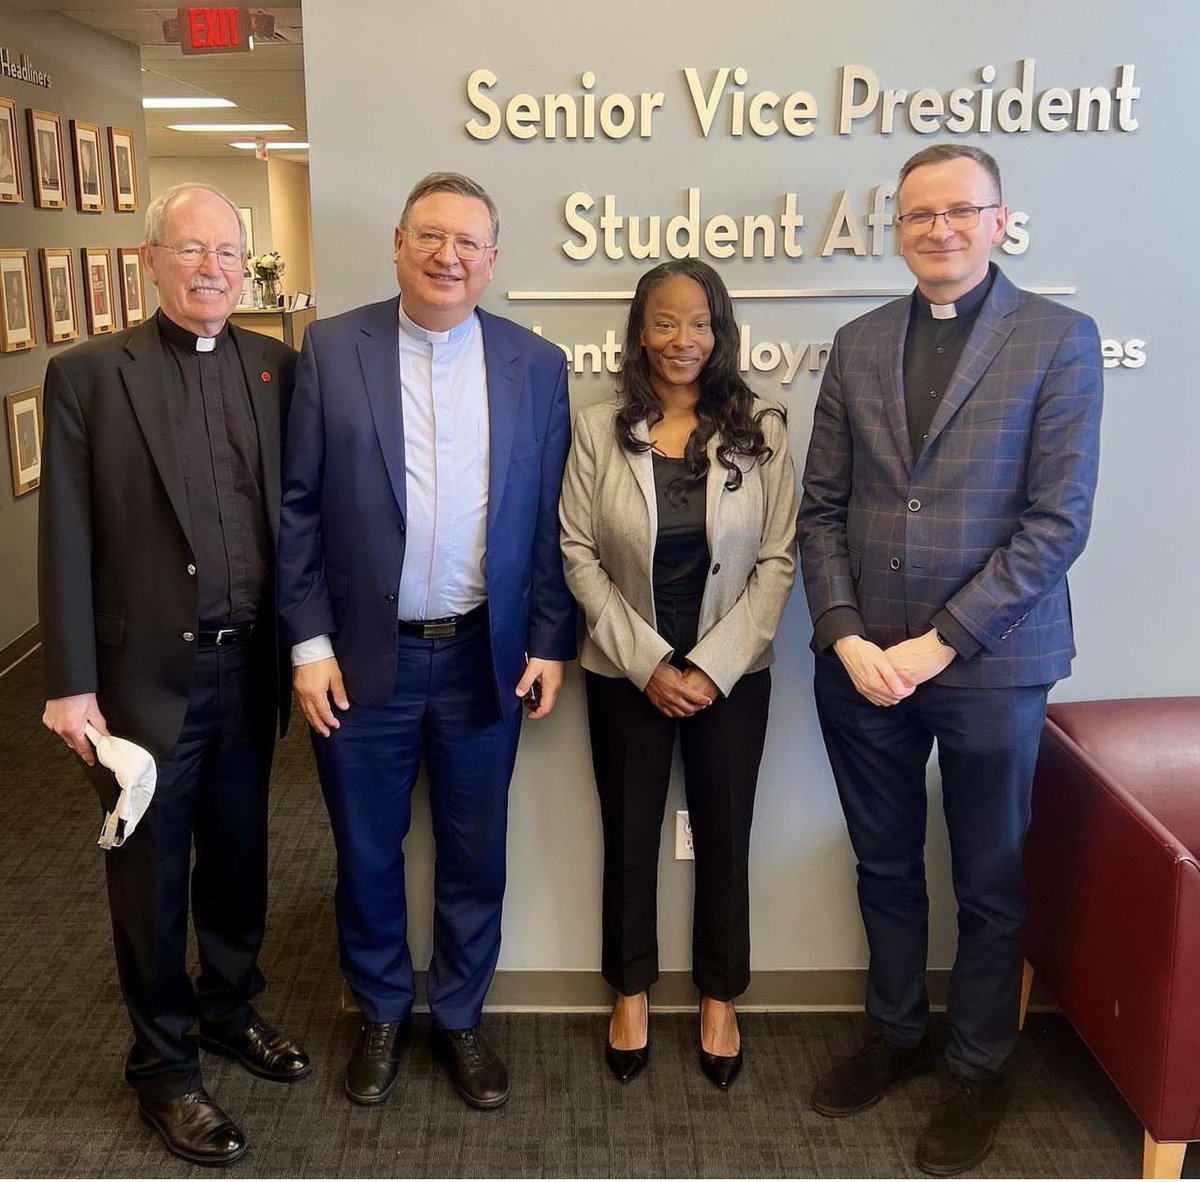 It was a pleasure to meet Fathers Wrobel and Kowalski visiting from Catholic University of Lublin in Poland, back on May 1. I enjoyed our discussion on the student experience at our universities. Thank you to LMU Chancellor Fr. Engh for including me in their delegation visit.